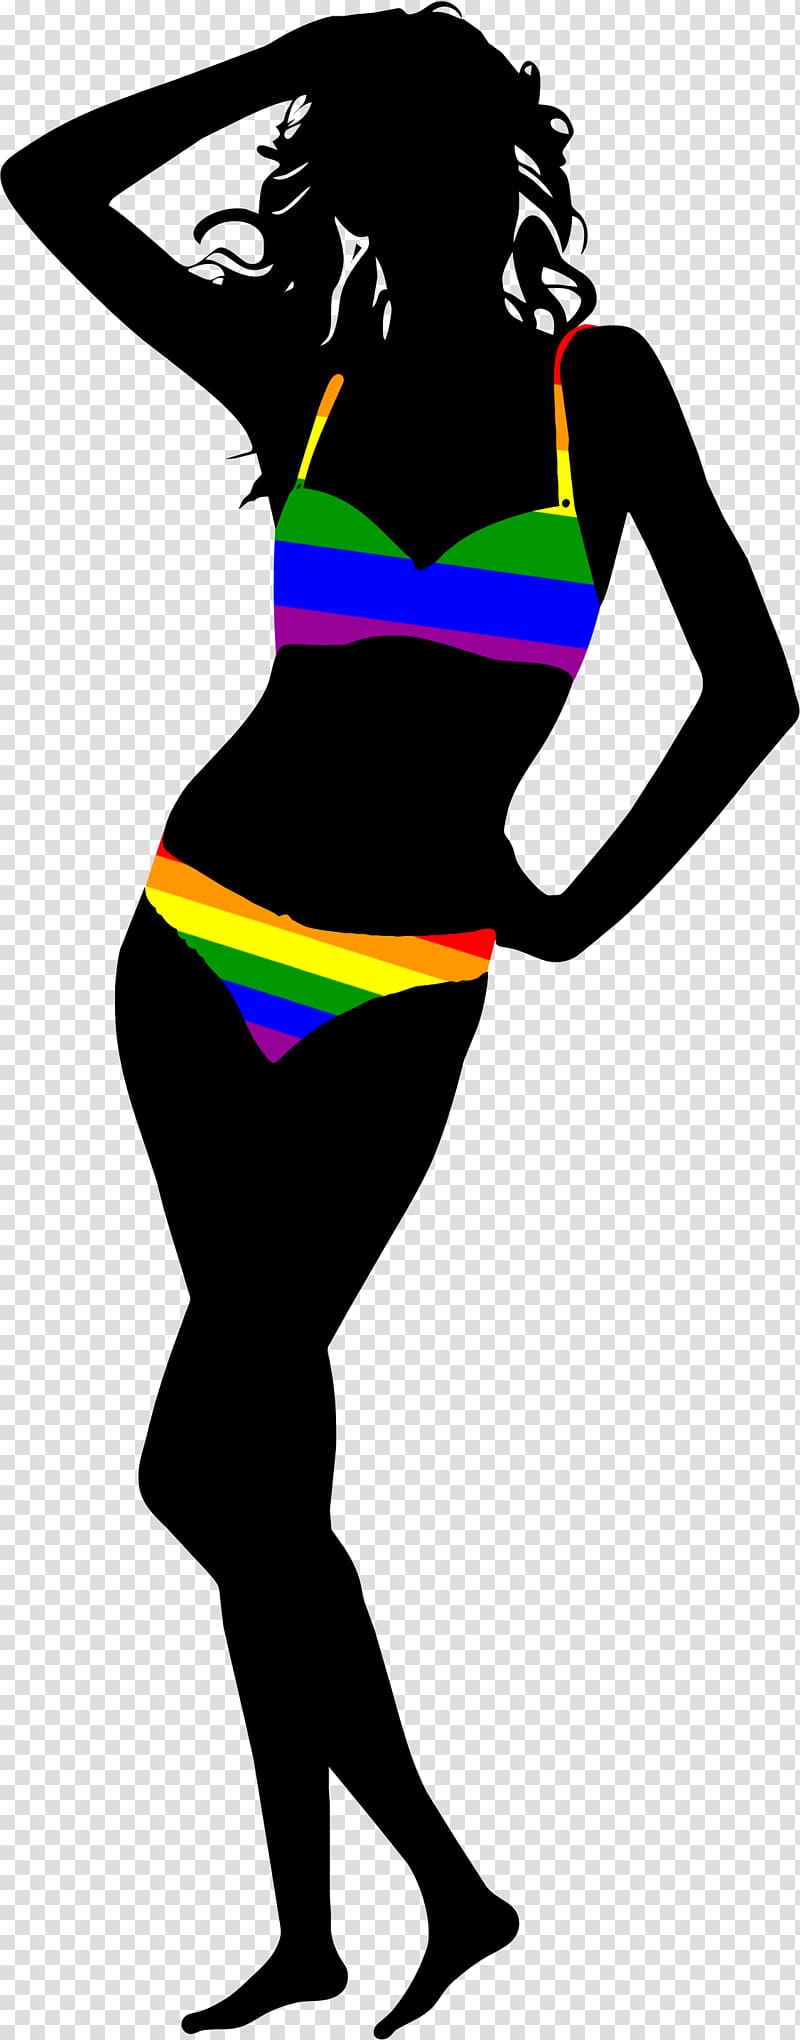 Rainbow flag Gay pride LGBT Lesbian, others transparent background PNG clipart